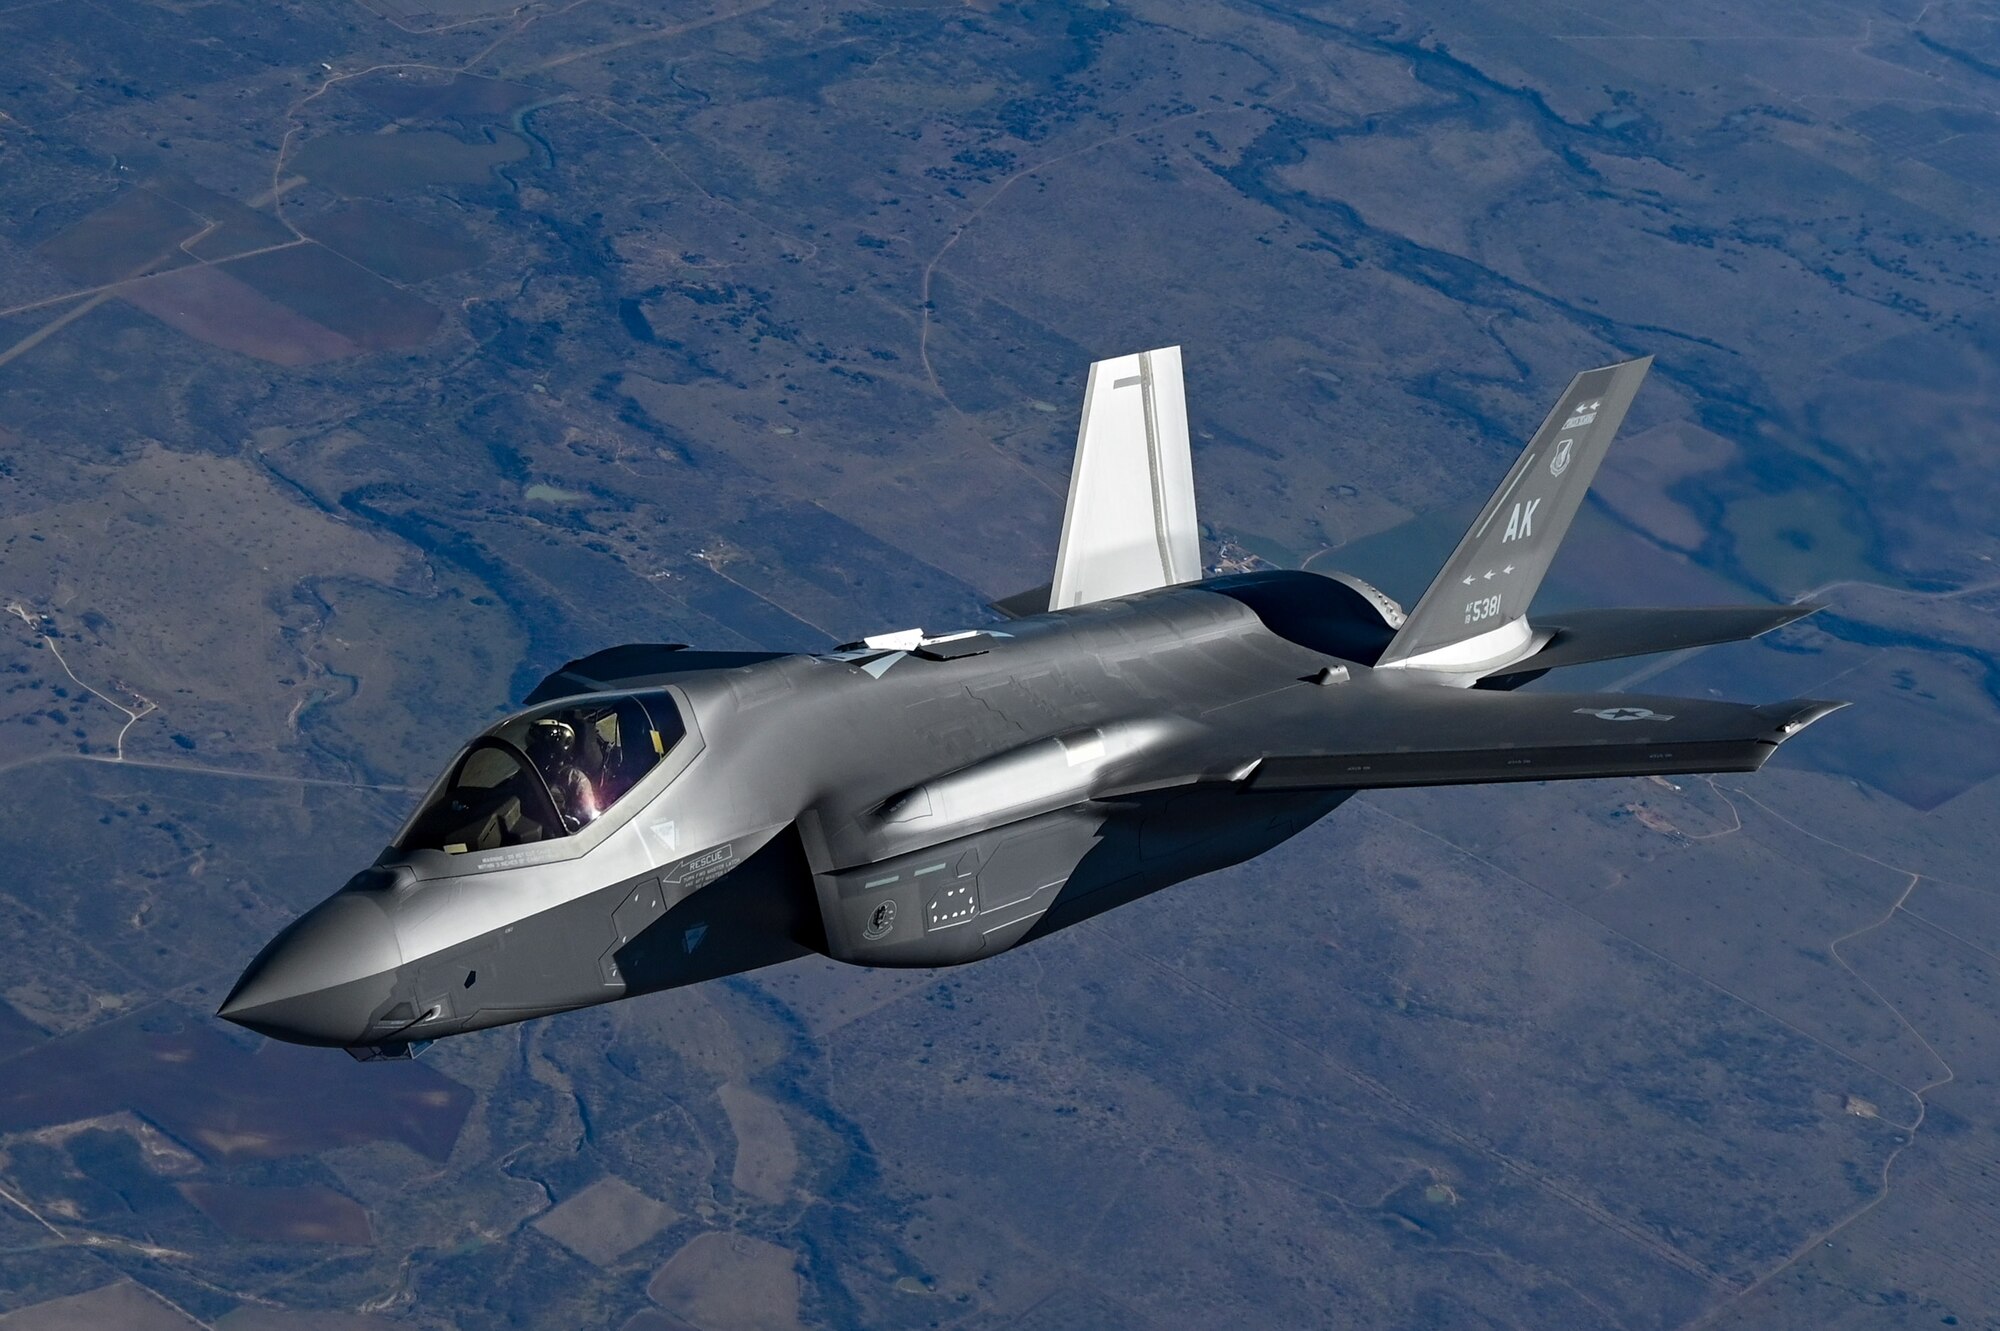 An F-35 Lightning II from the Defense Contract Maintenance Agency conducts its first flight and first tanking with a KC-135R Stratotanker from the 465th Air Refueling Squadron, Tinker Air Force Base, Oklahoma, Feb. 24, 2021. Once fully tested this F-35 will join the fleet at Eielson Air Force Base, Alaska. (U.S. Air Force photo by Senior Airman Mary Begy)